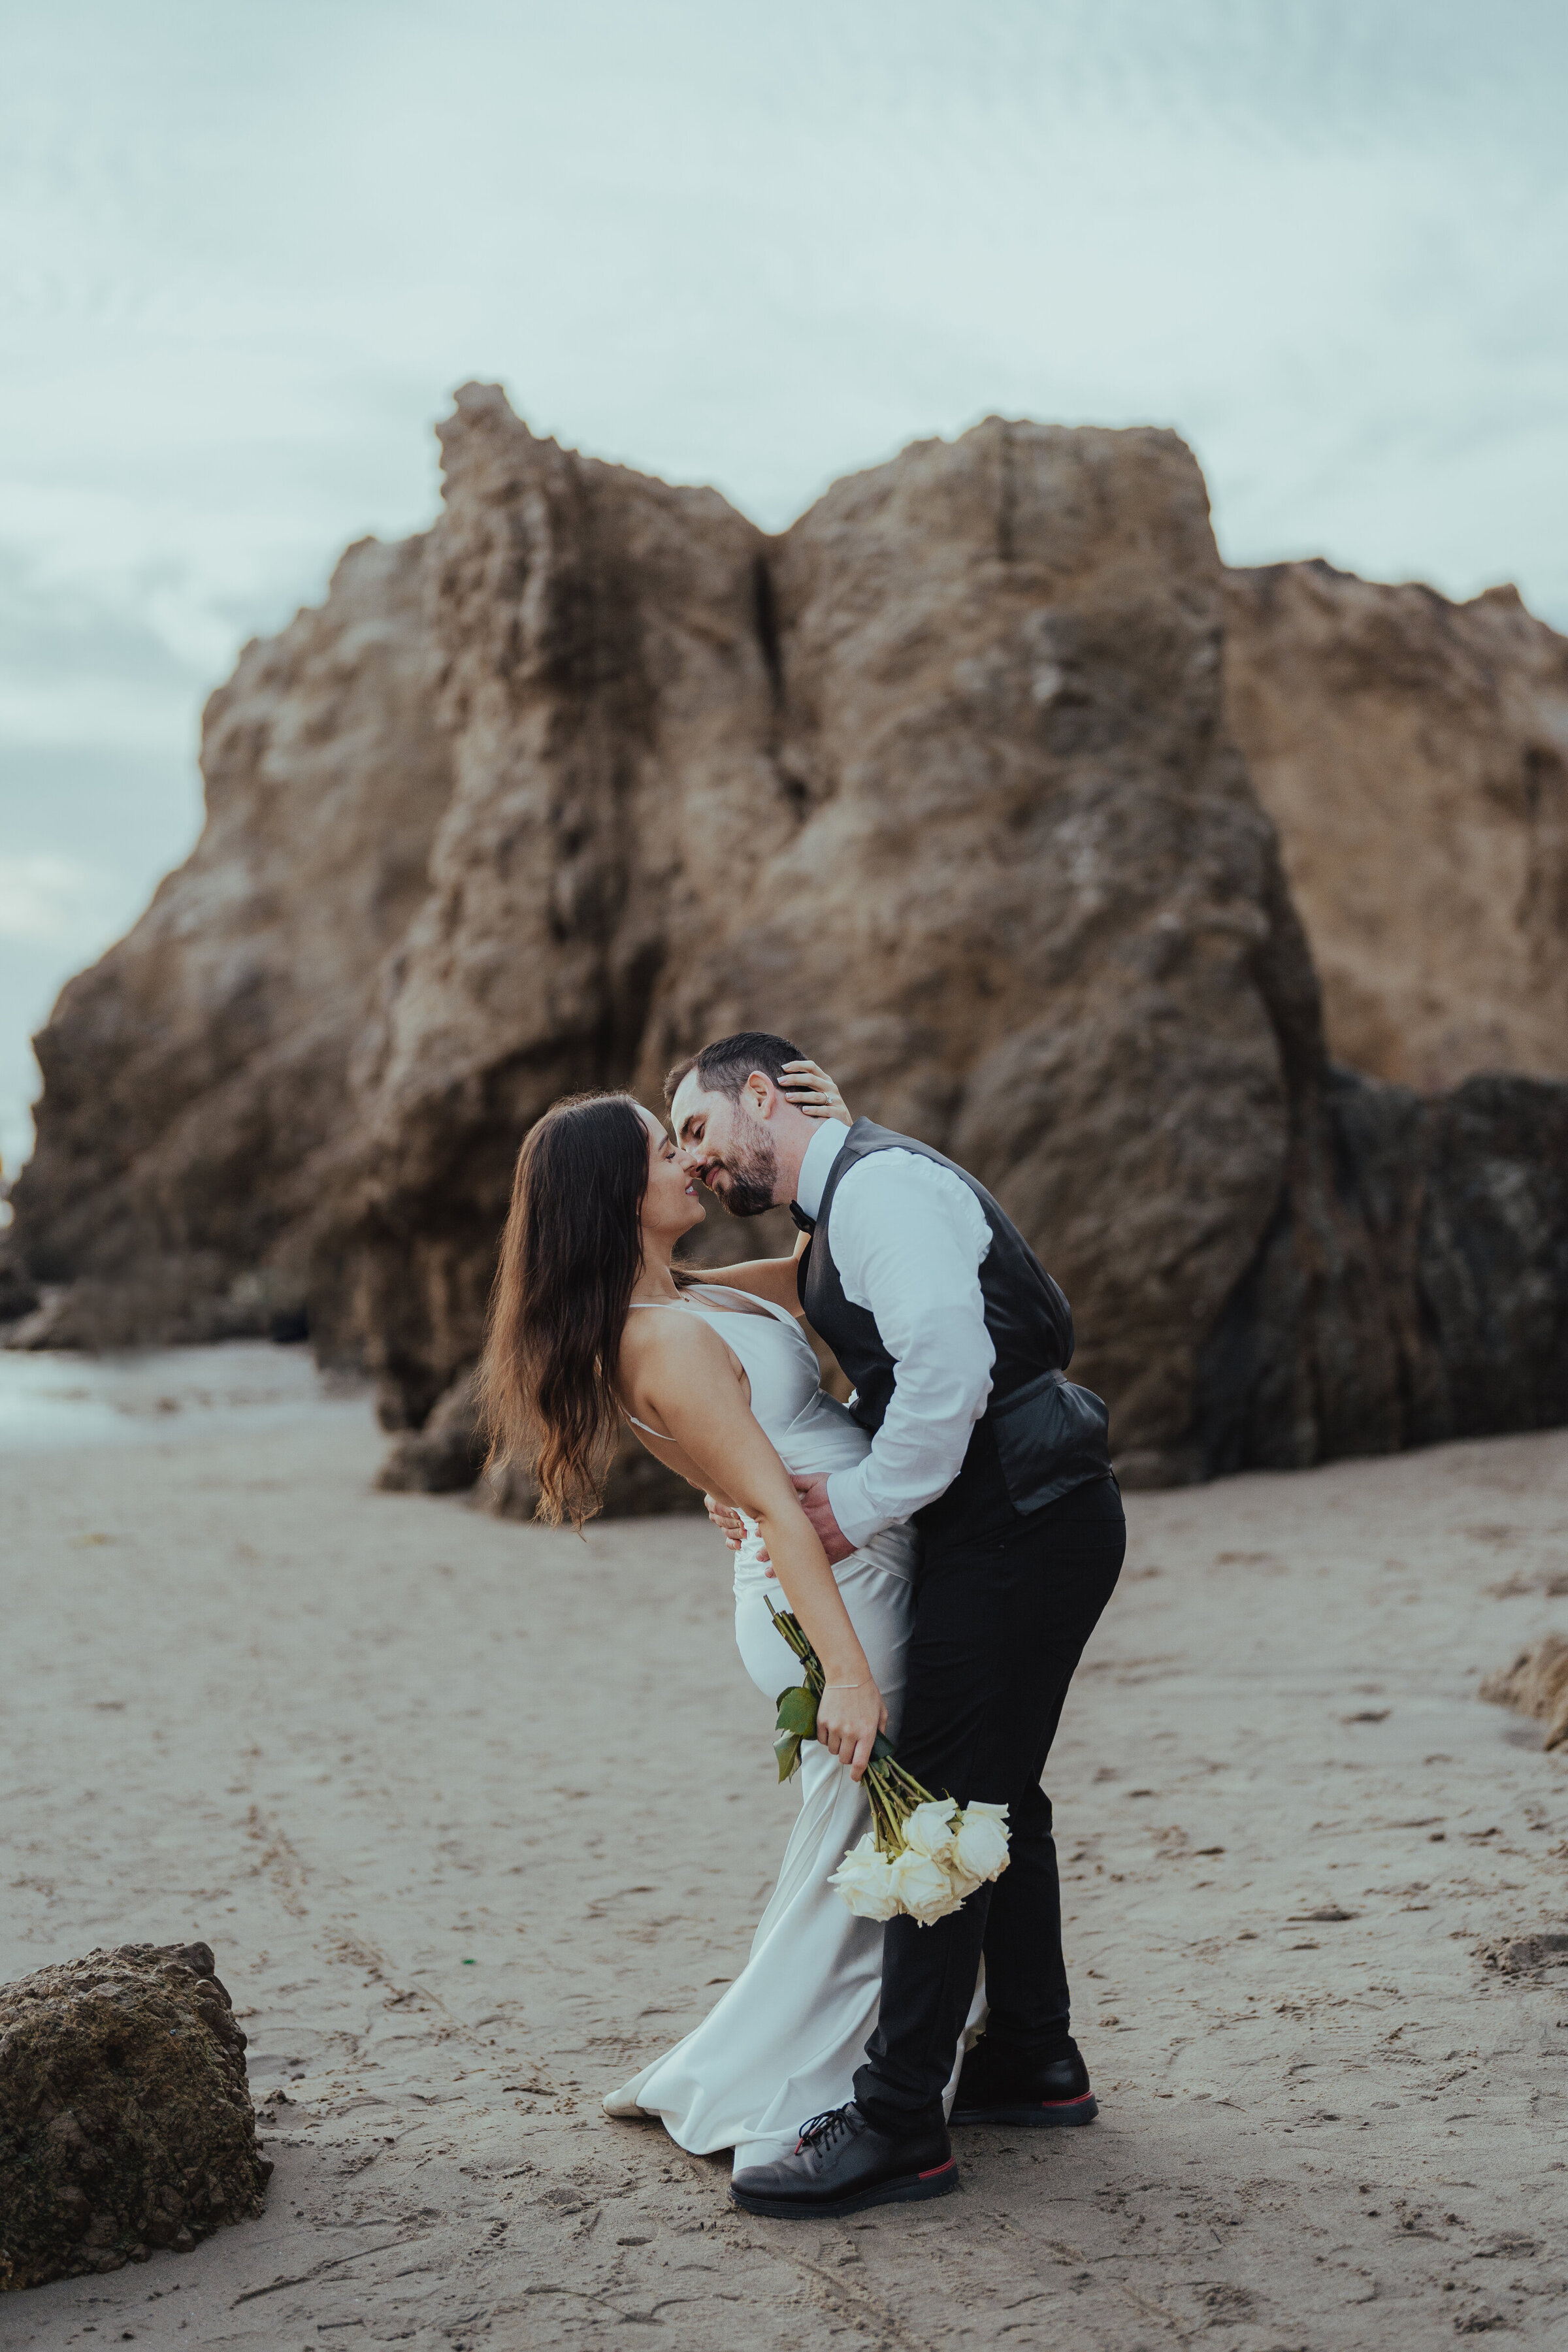 Bride and groom sharing a kiss on a Los Angeles beach, with a picturesque seascape